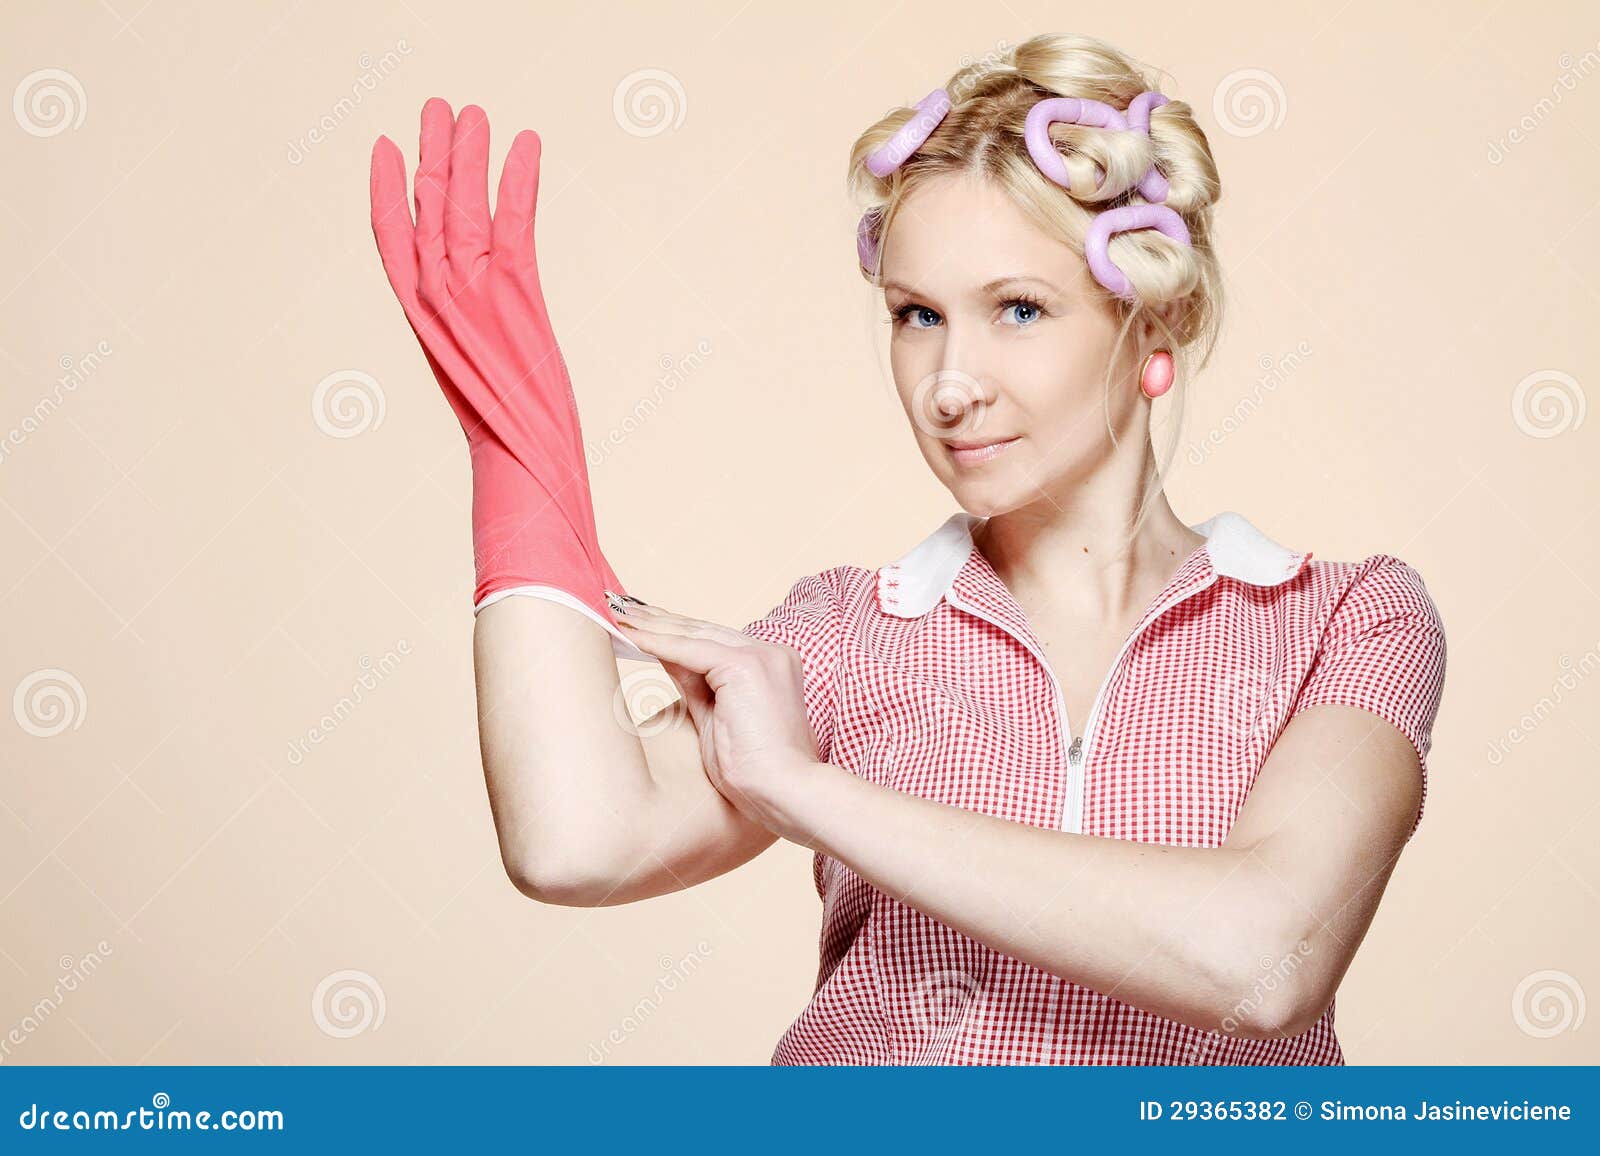 Funny Young Housewife With Gloves Stock Photography 